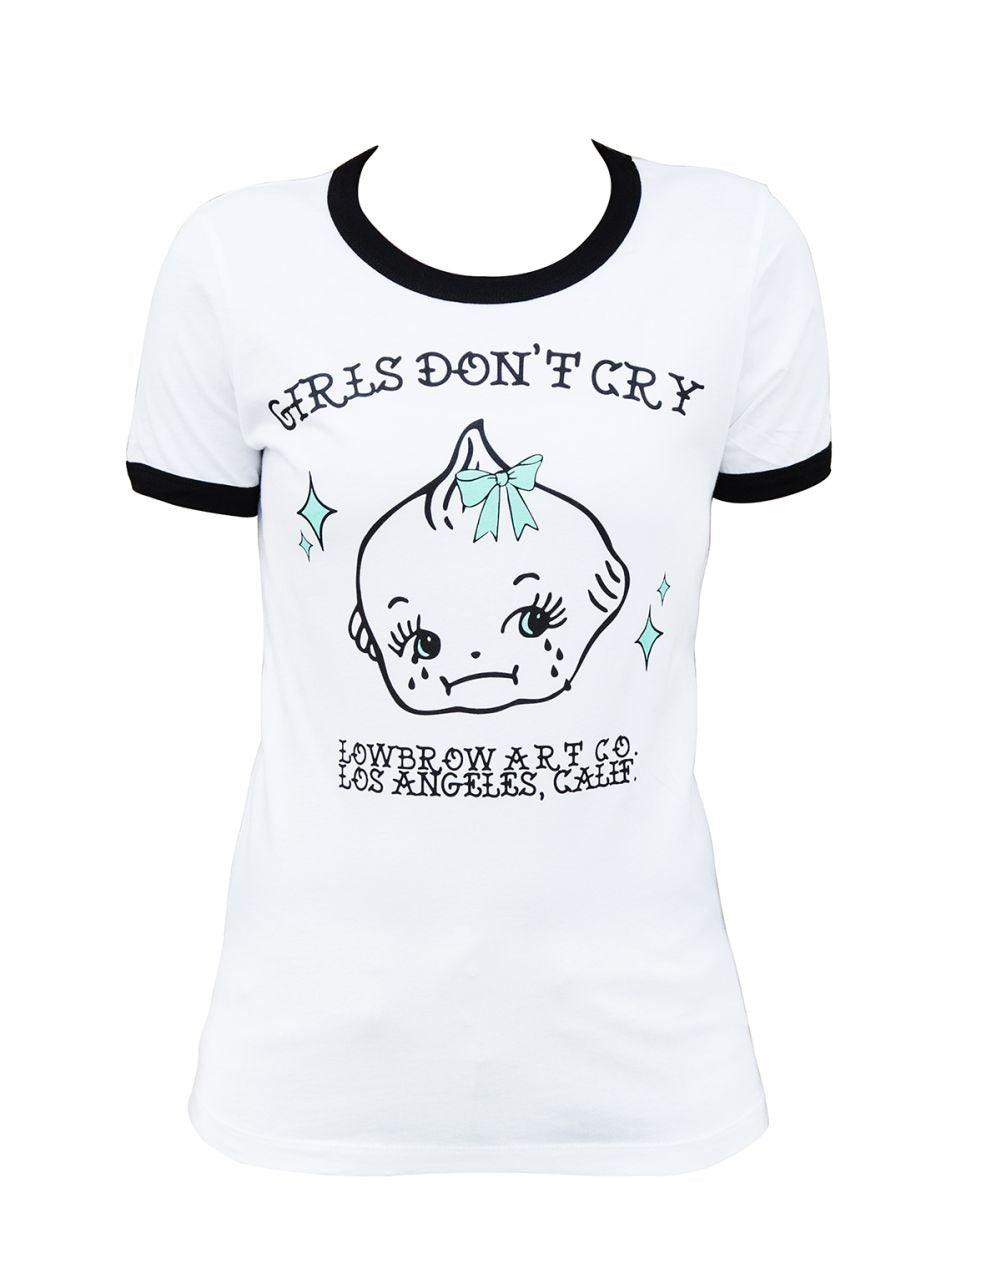 Lowbrow Girls Don’t Cry Womens Tee - Flyclothing LLC